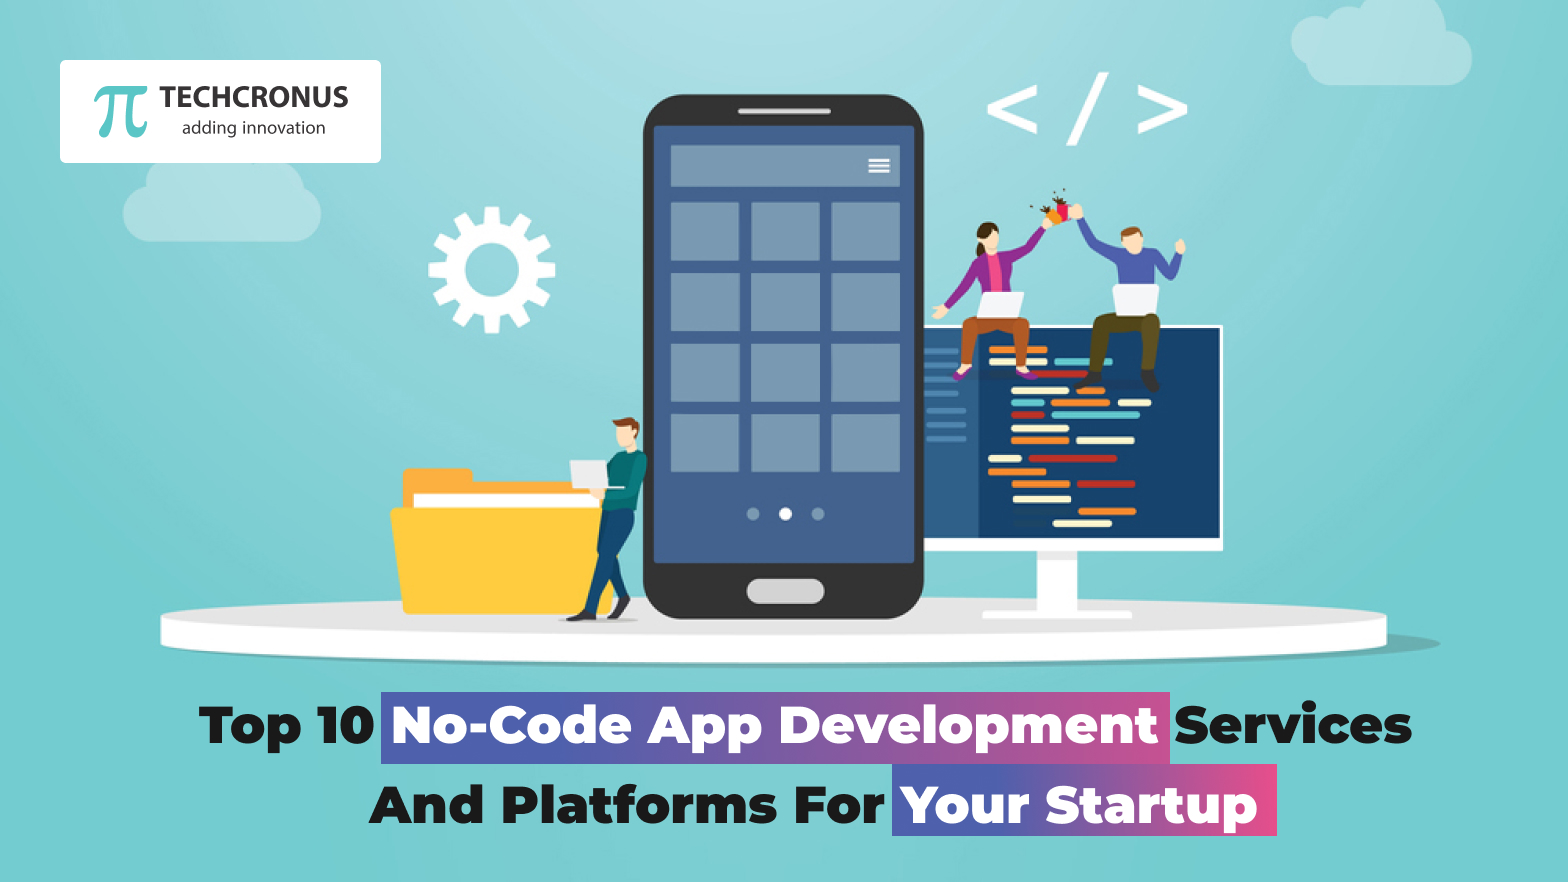 Top 10 No-code App Development Services and Platforms For Your Startup